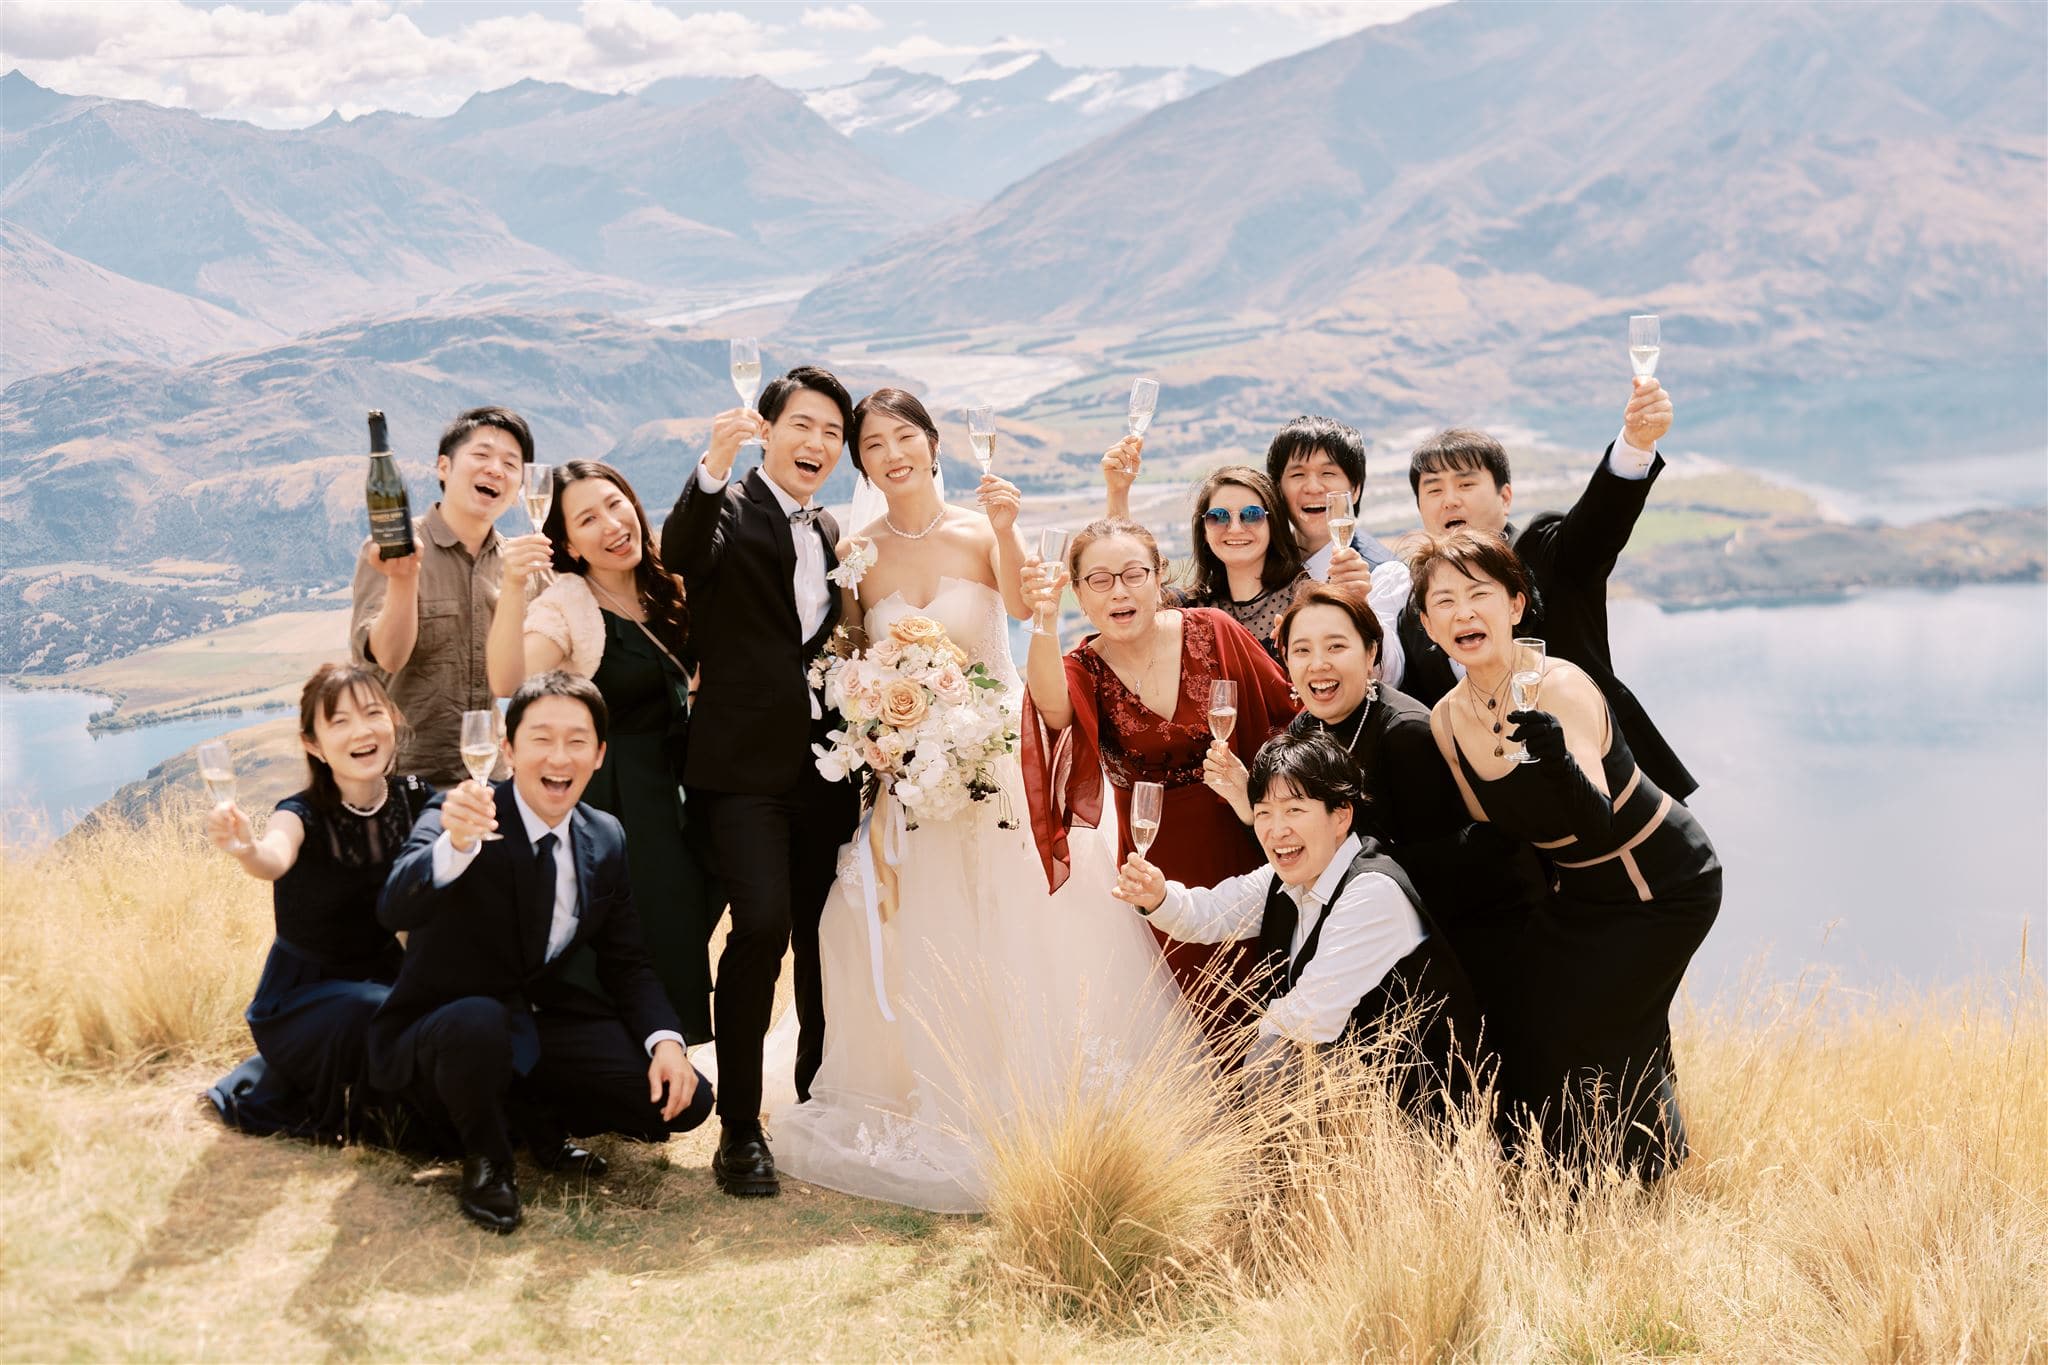 Queenstown New Zealand Heli Wedding Elopement Photographer クイーンズタウン　ニュージーランド　エロープメント 結婚式 | A wedding group celebrating outdoors with a mountainous landscape and a lake in the background, captured by YURI, a Queenstown Wedding Photographer.